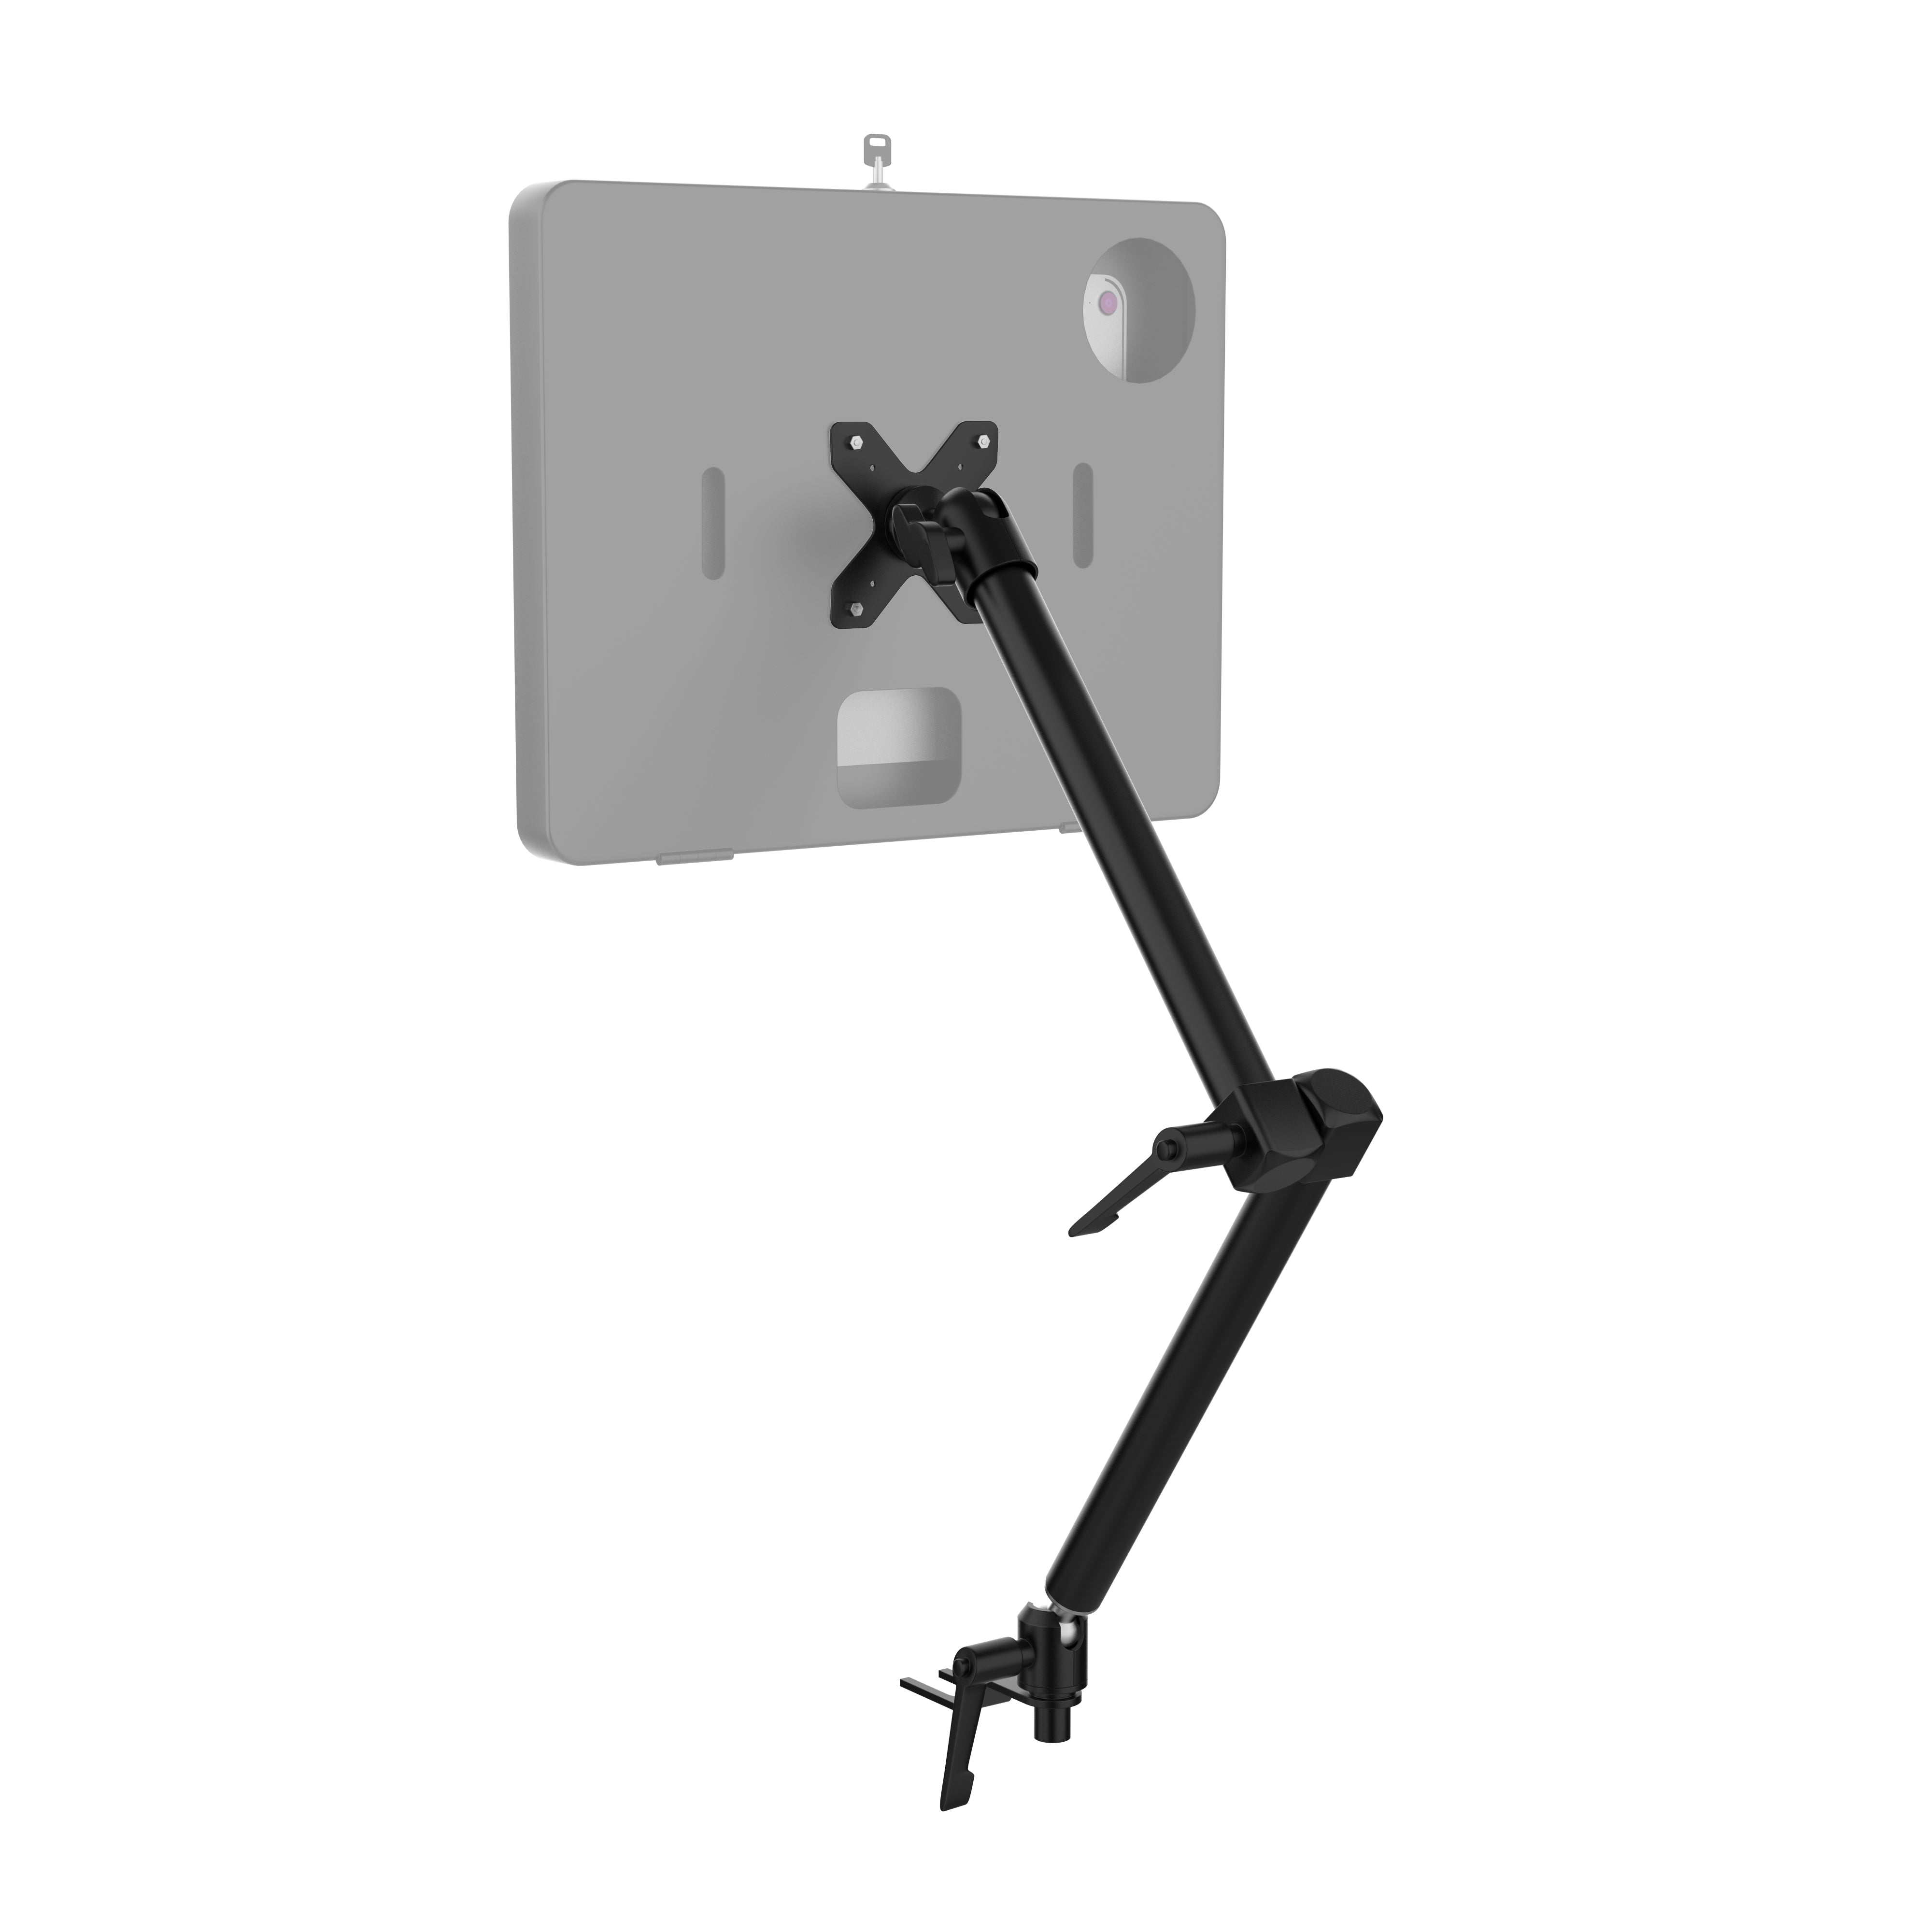 Aluminum Vehicle Mount for 7-14 Inch Tablets, Including iPad 10.2-inch (7th/ 8th/ 9th Generation)